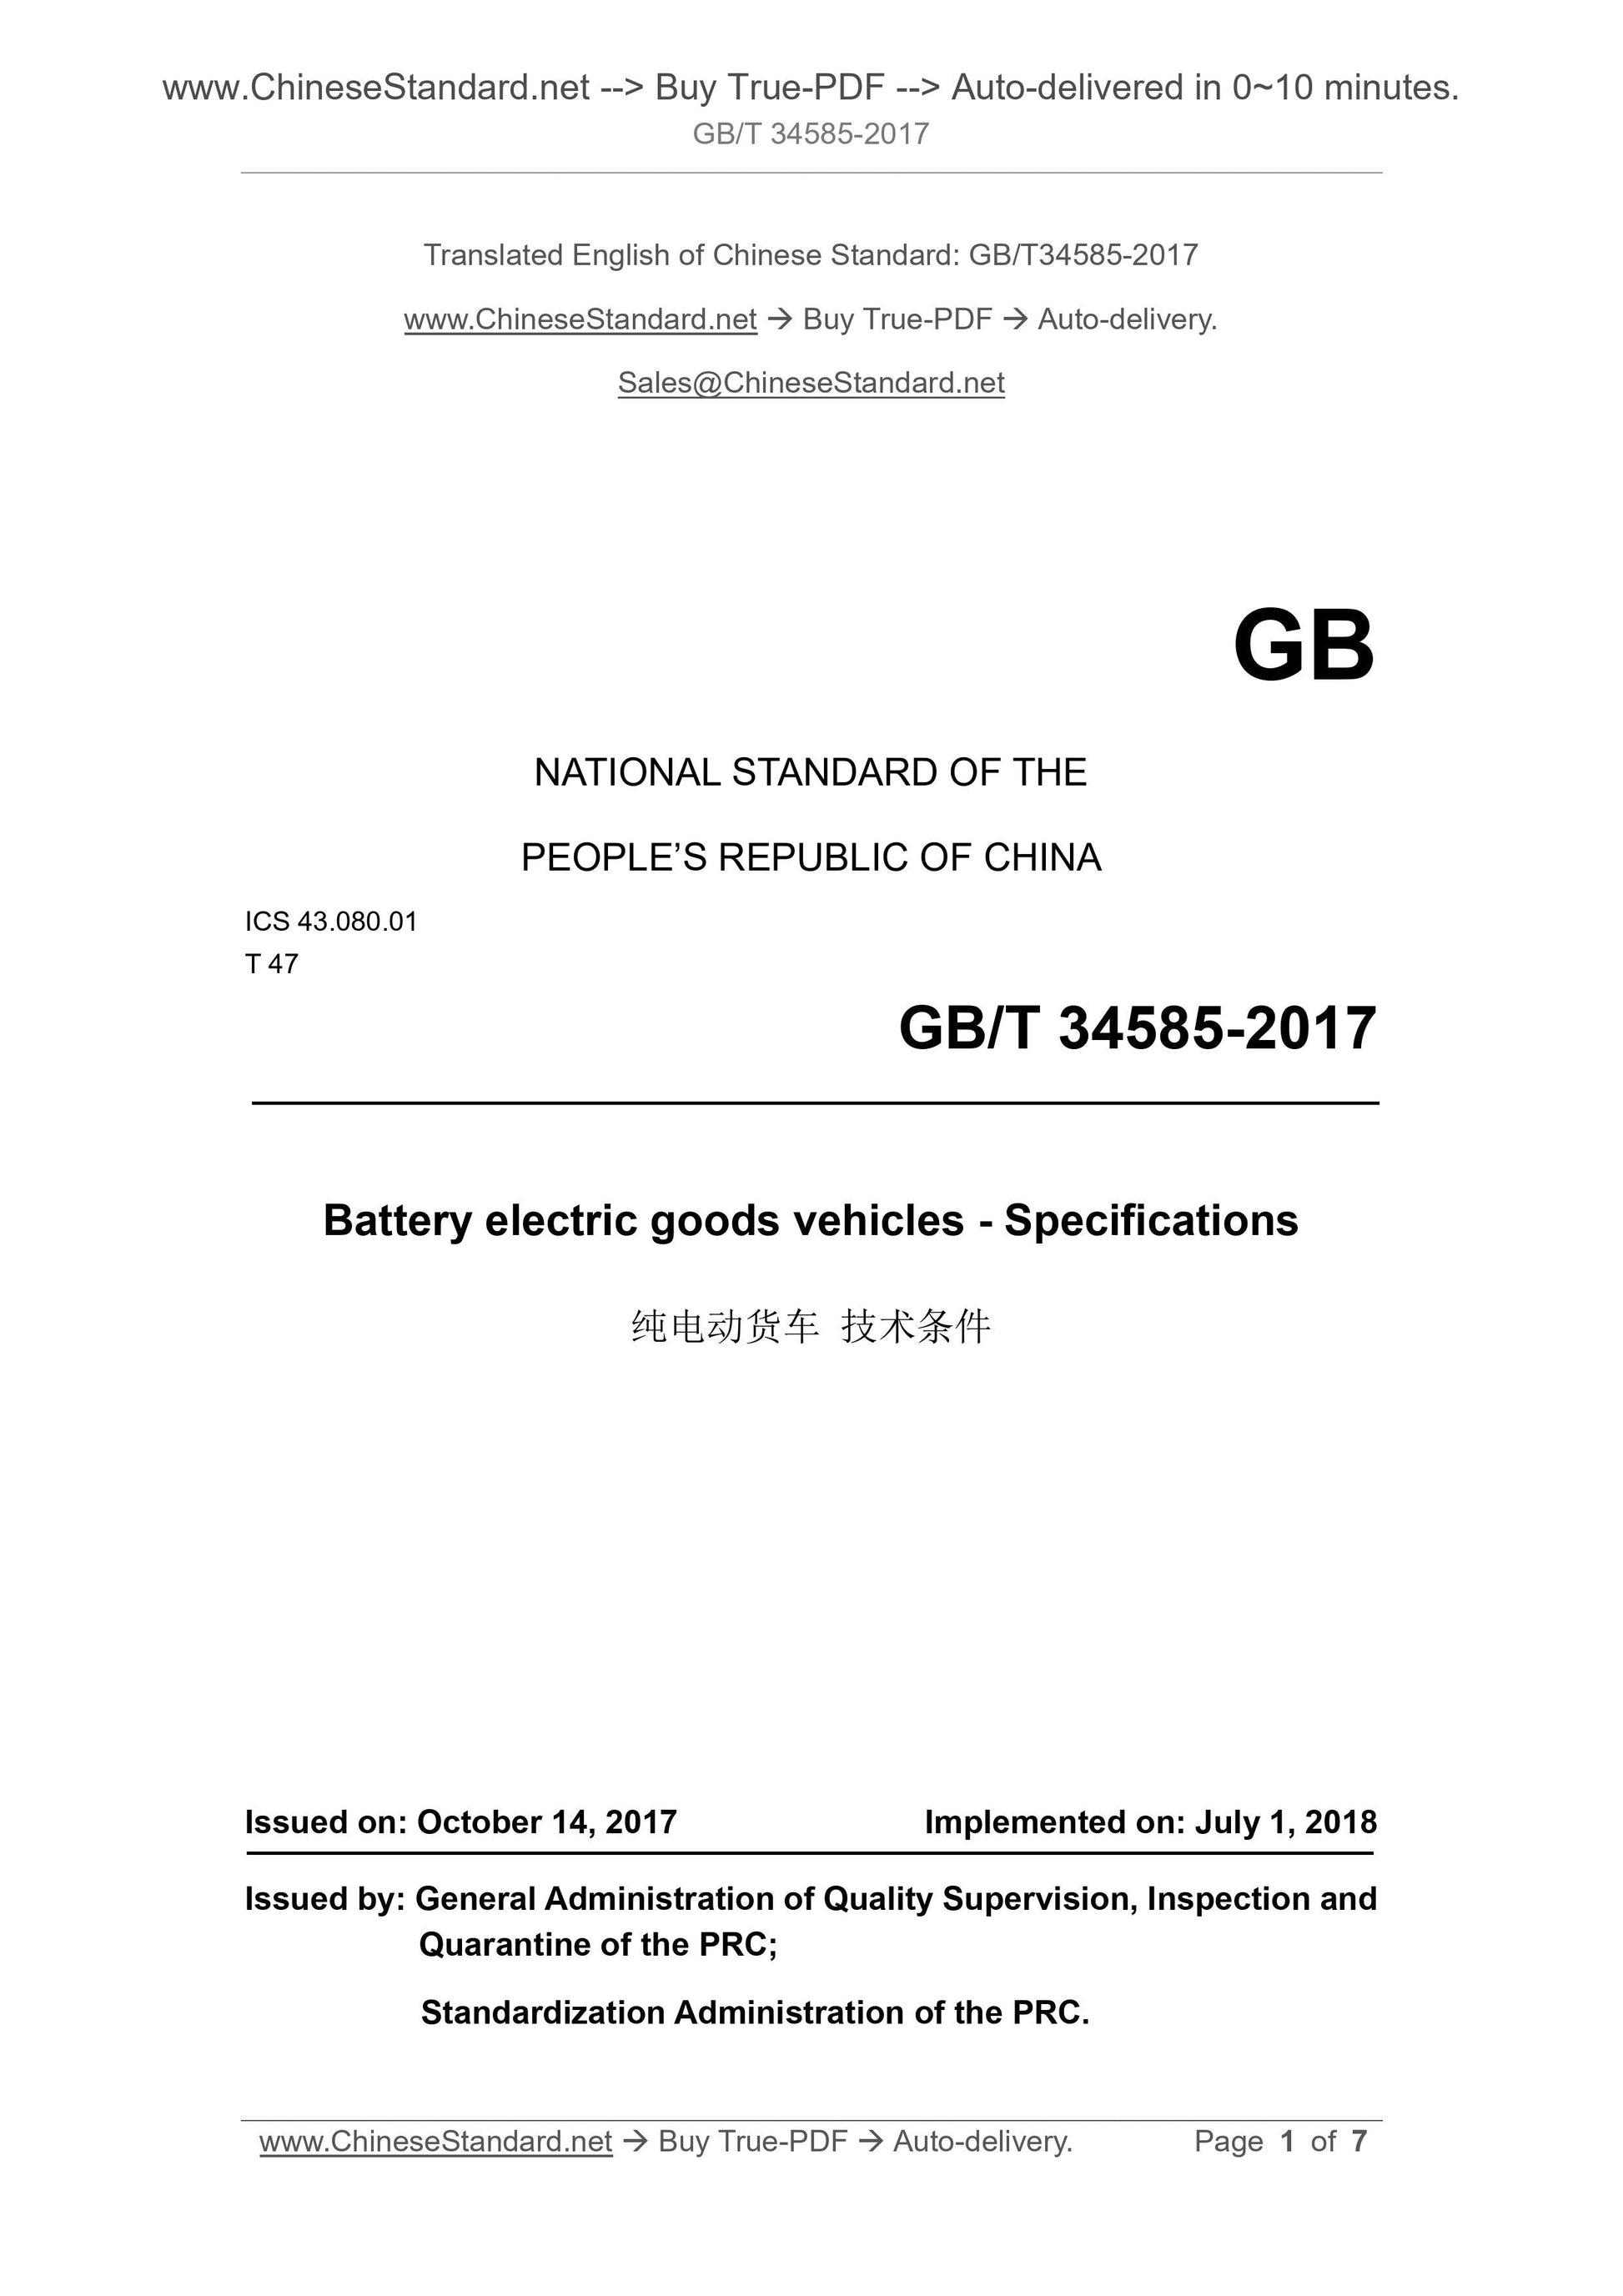 GB/T 34585-2017 Page 1